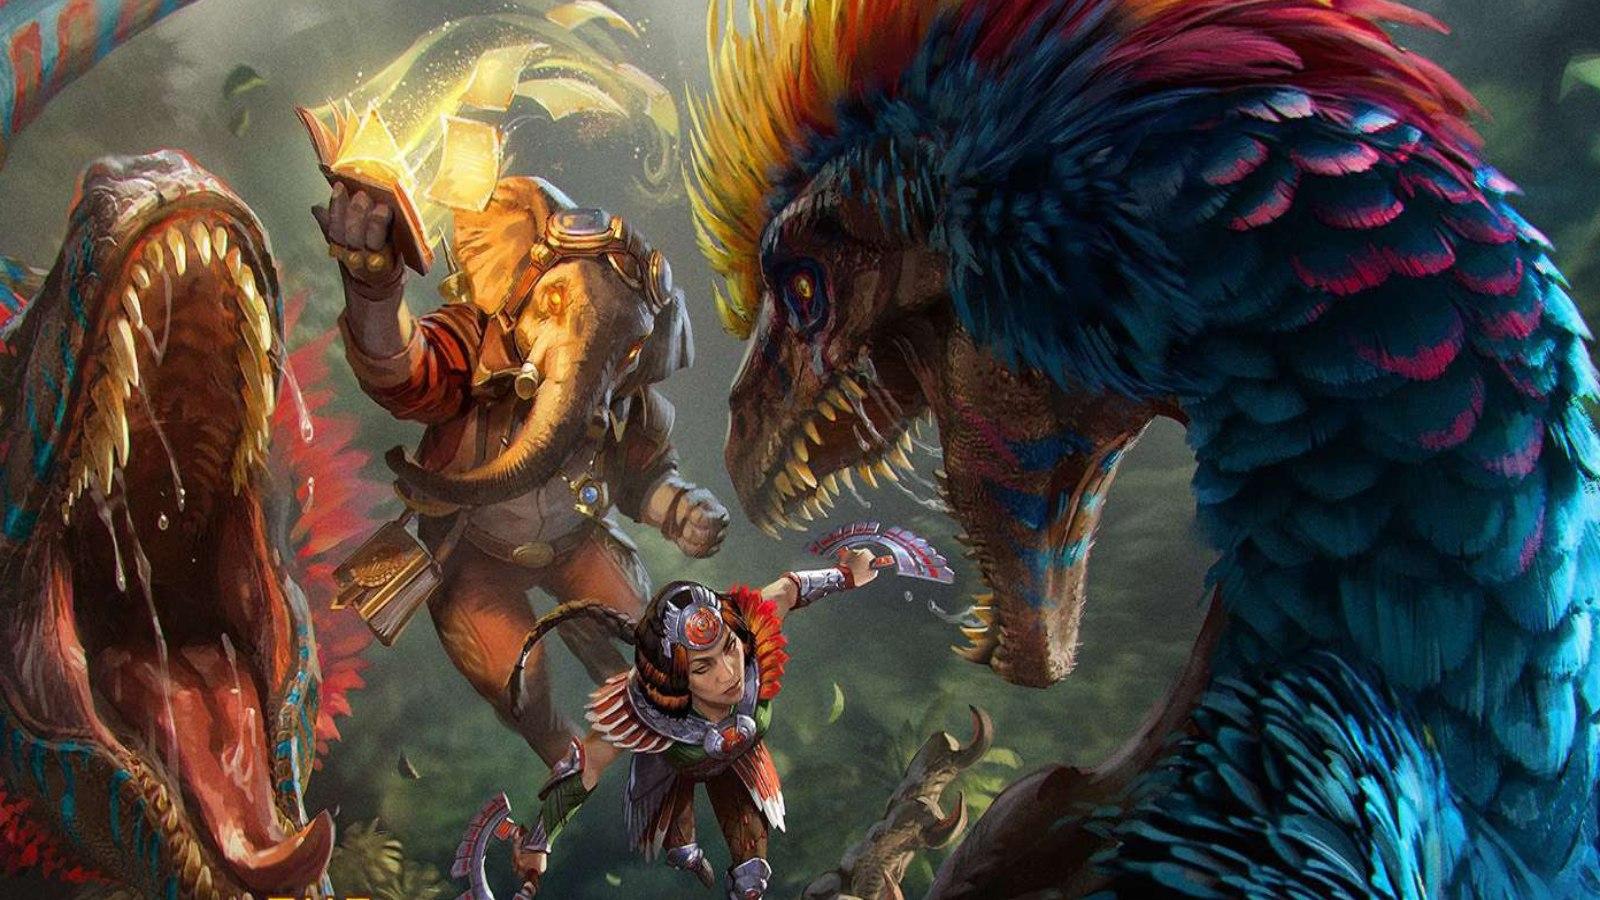 MTG Ixalan Huatlli and Quintorius face off against dinosaurs